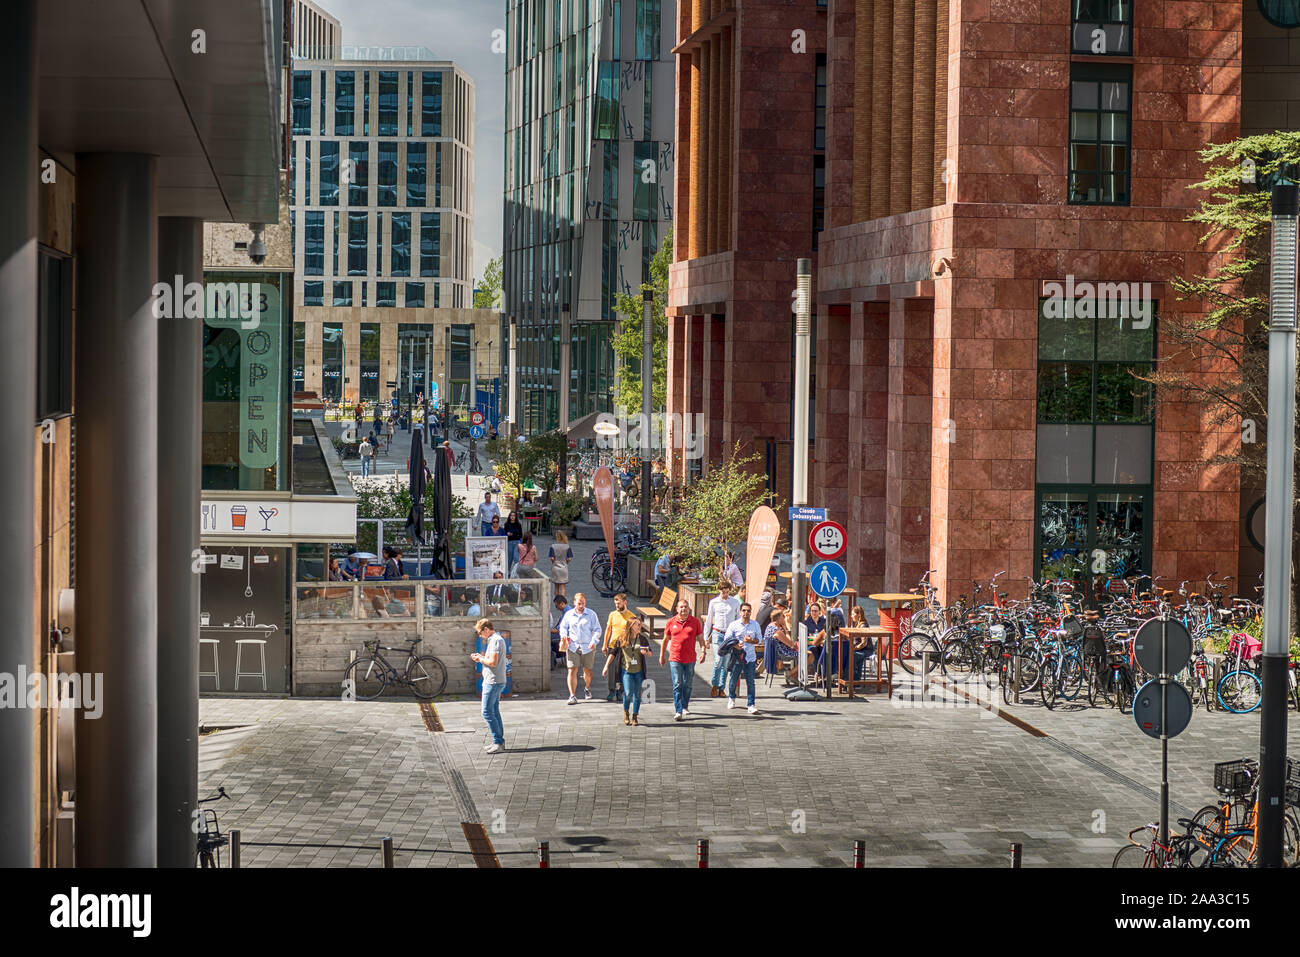 Amsterdam, Claude Debussylaan, the Netherlands, 08/23/2019, Street in the Amsterdam Zuidas (South axis) business district, Modern office buildings, ca Stock Photo